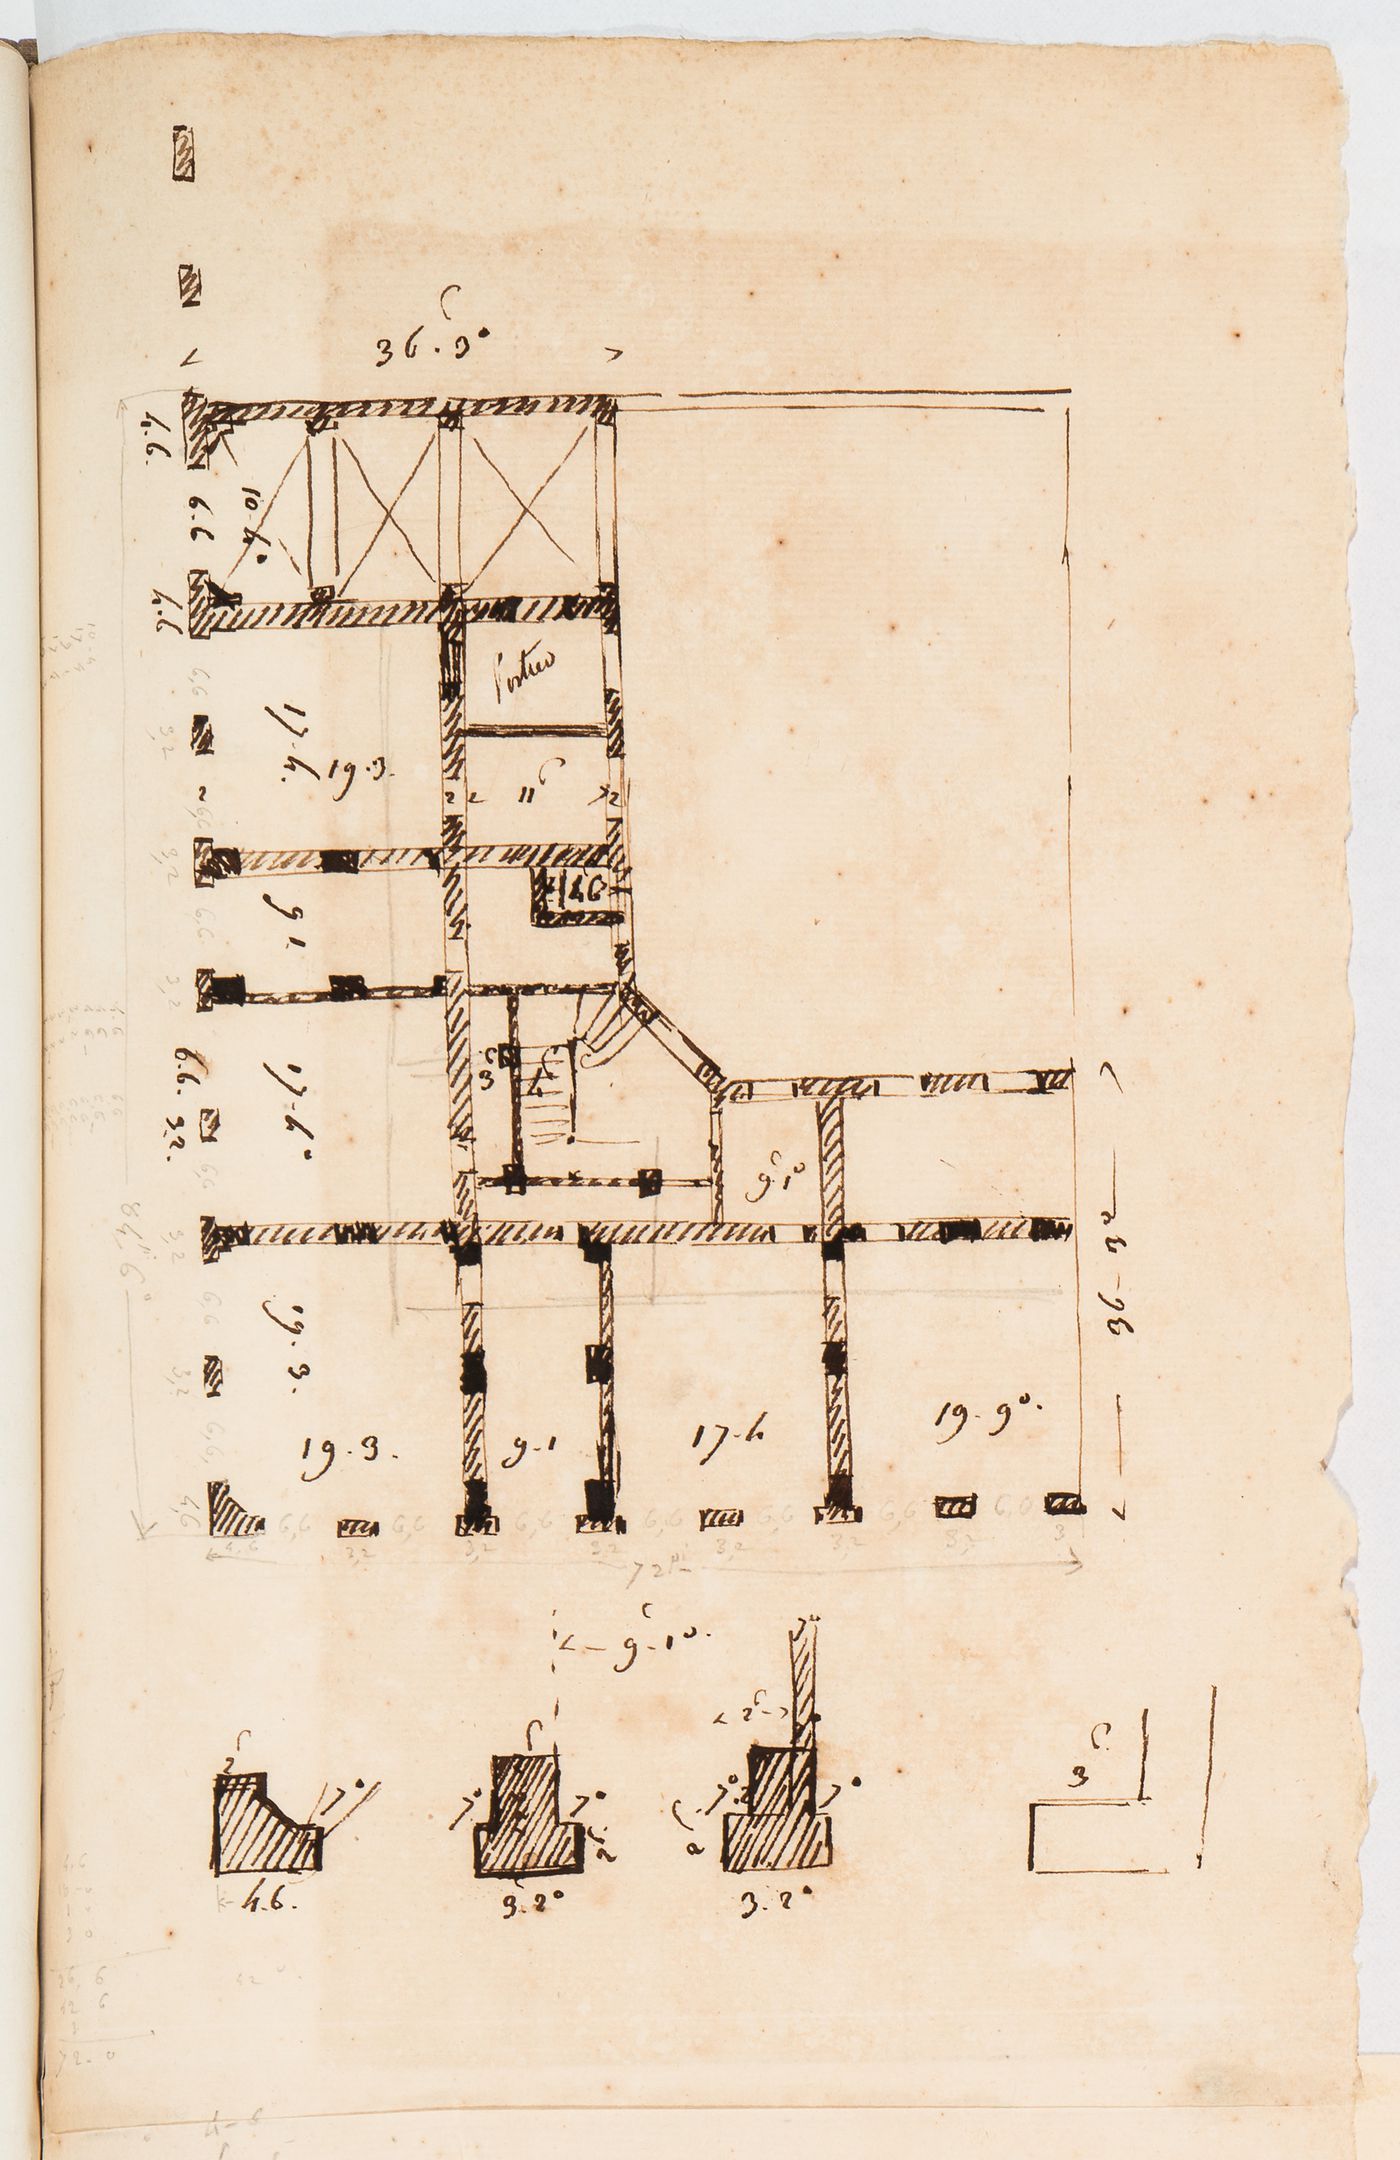 Sketch plan, possibly for a hôtel for the de Lorgeril family in Rennes